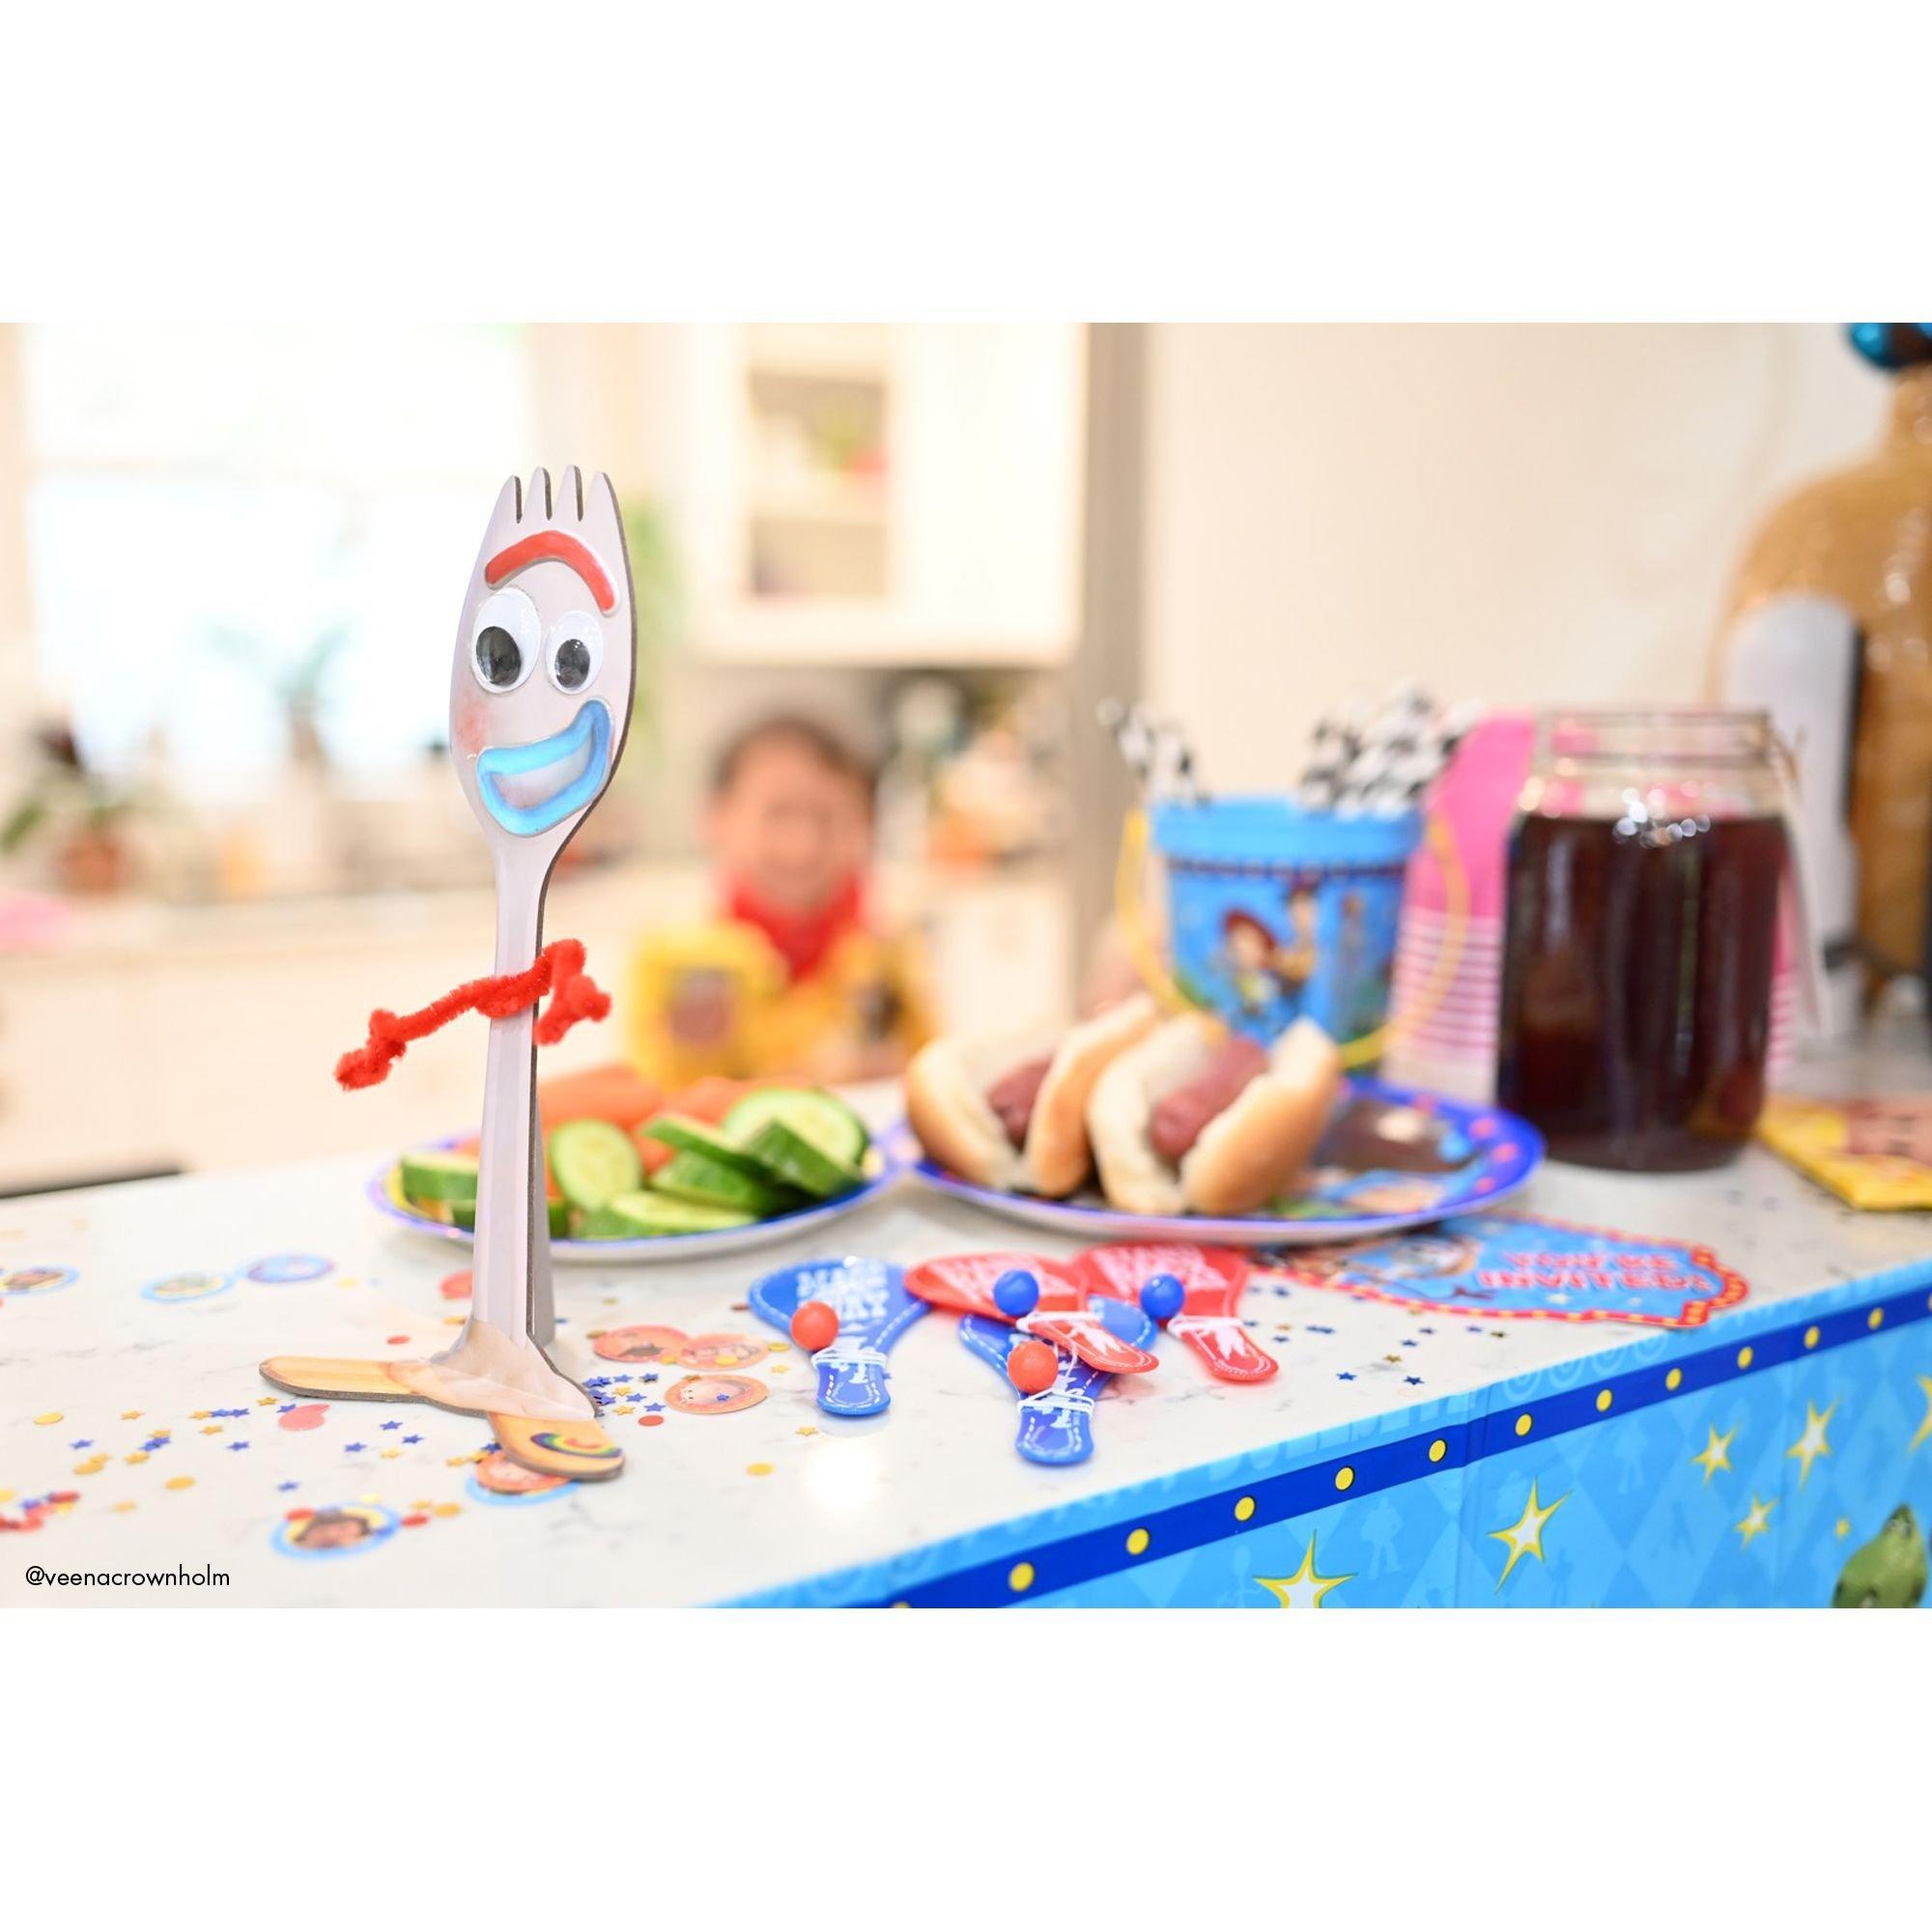 Forky Kit DIY Toy Story Party Activity Party Favor Home School Activity 